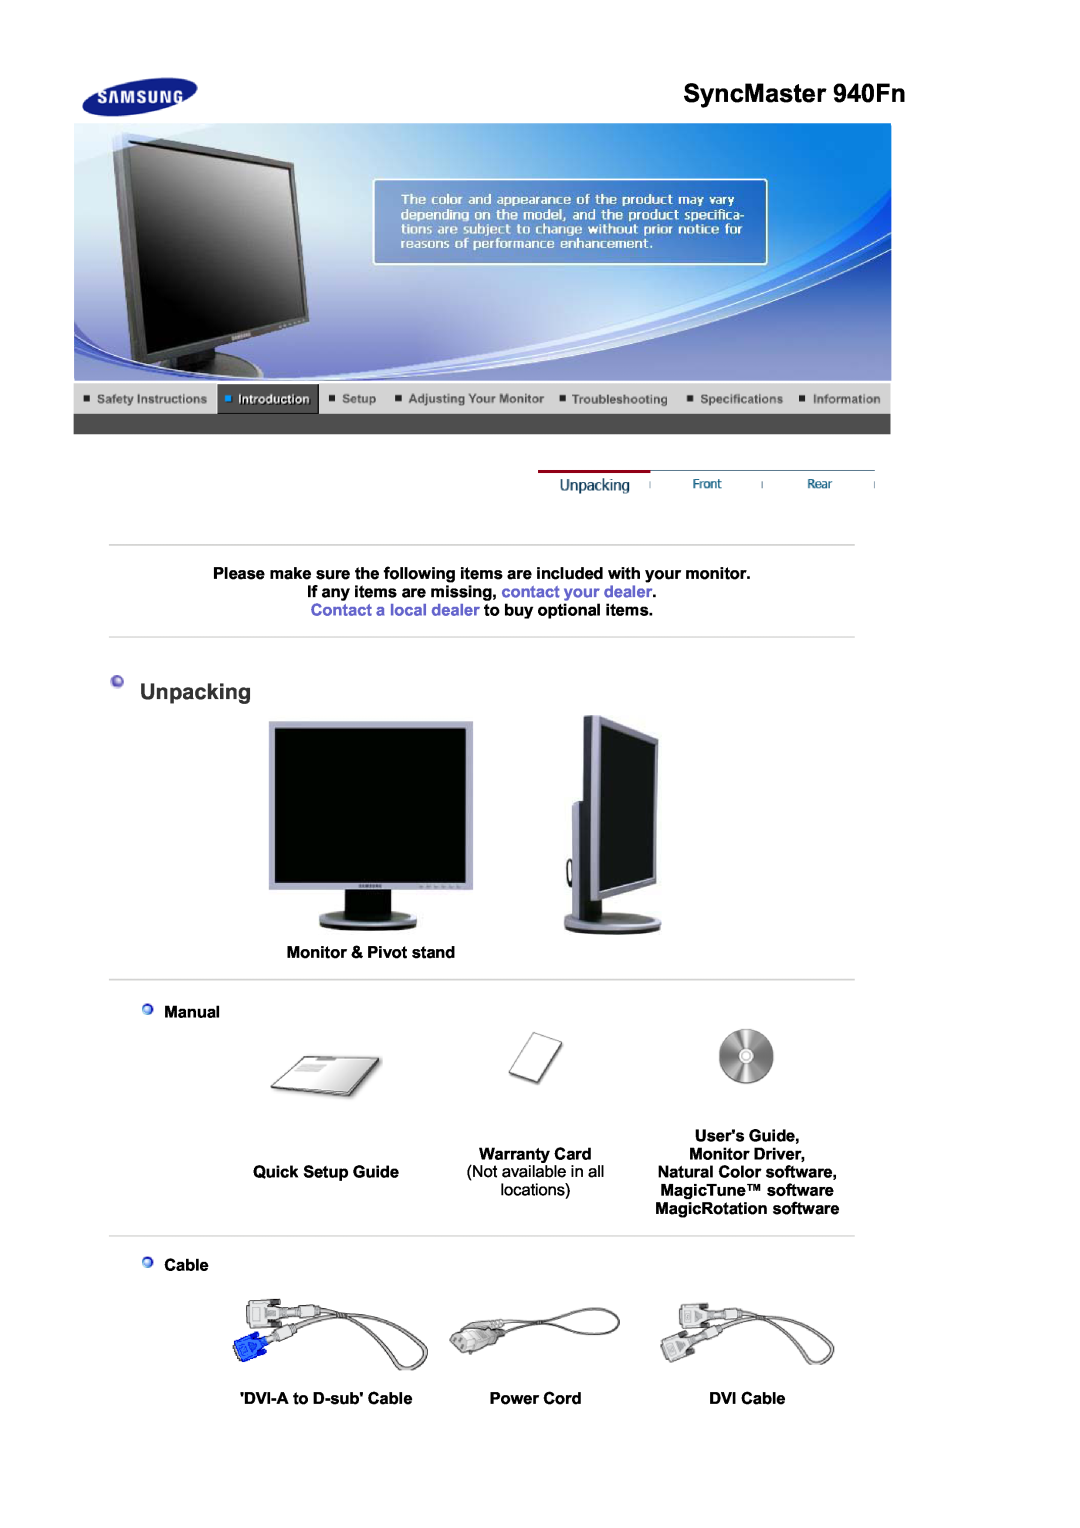 Samsung 940FN SyncMaster 940Fn, Monitor & Pivot stand Manual, DVI-A to D-sub Cable, DVI Cable, Unpacking, Users Guide 